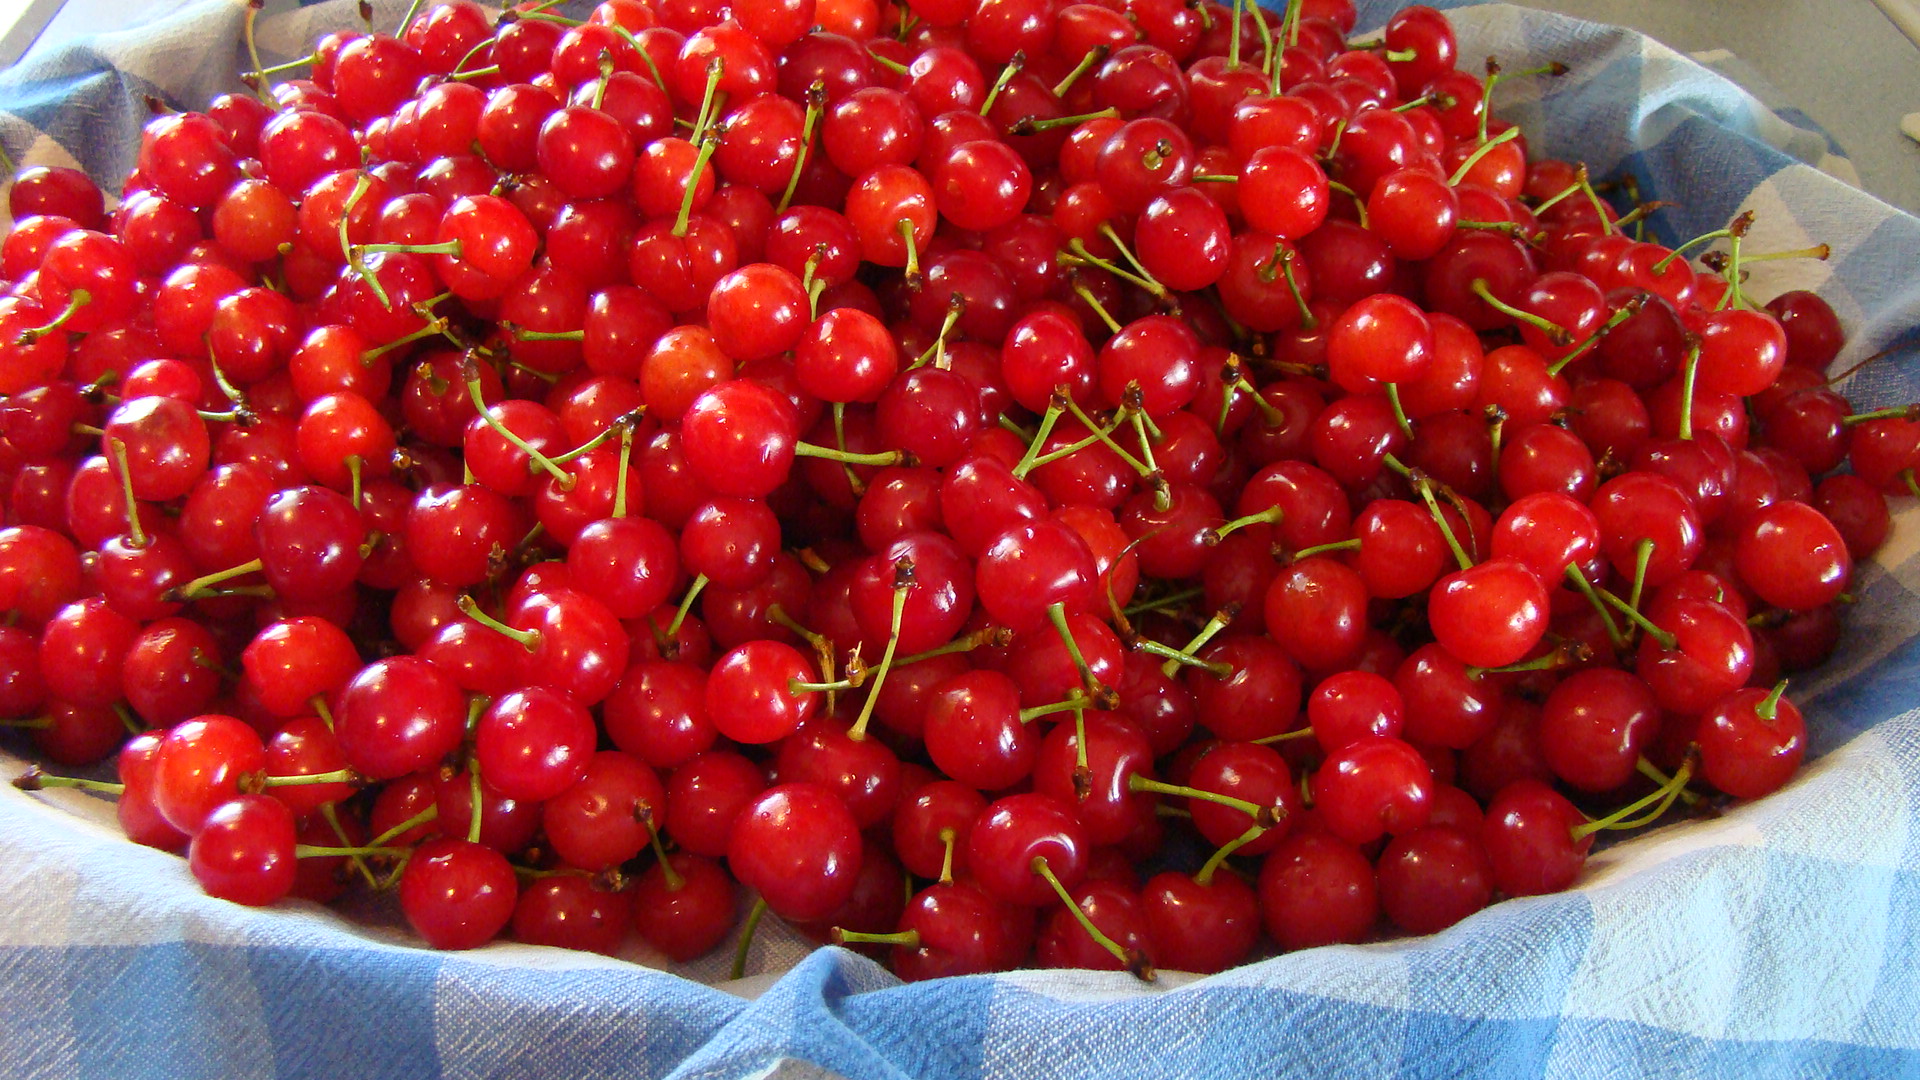 Sour Cherries Picked Today in the Shenandoah Valley | Shenandoah ...